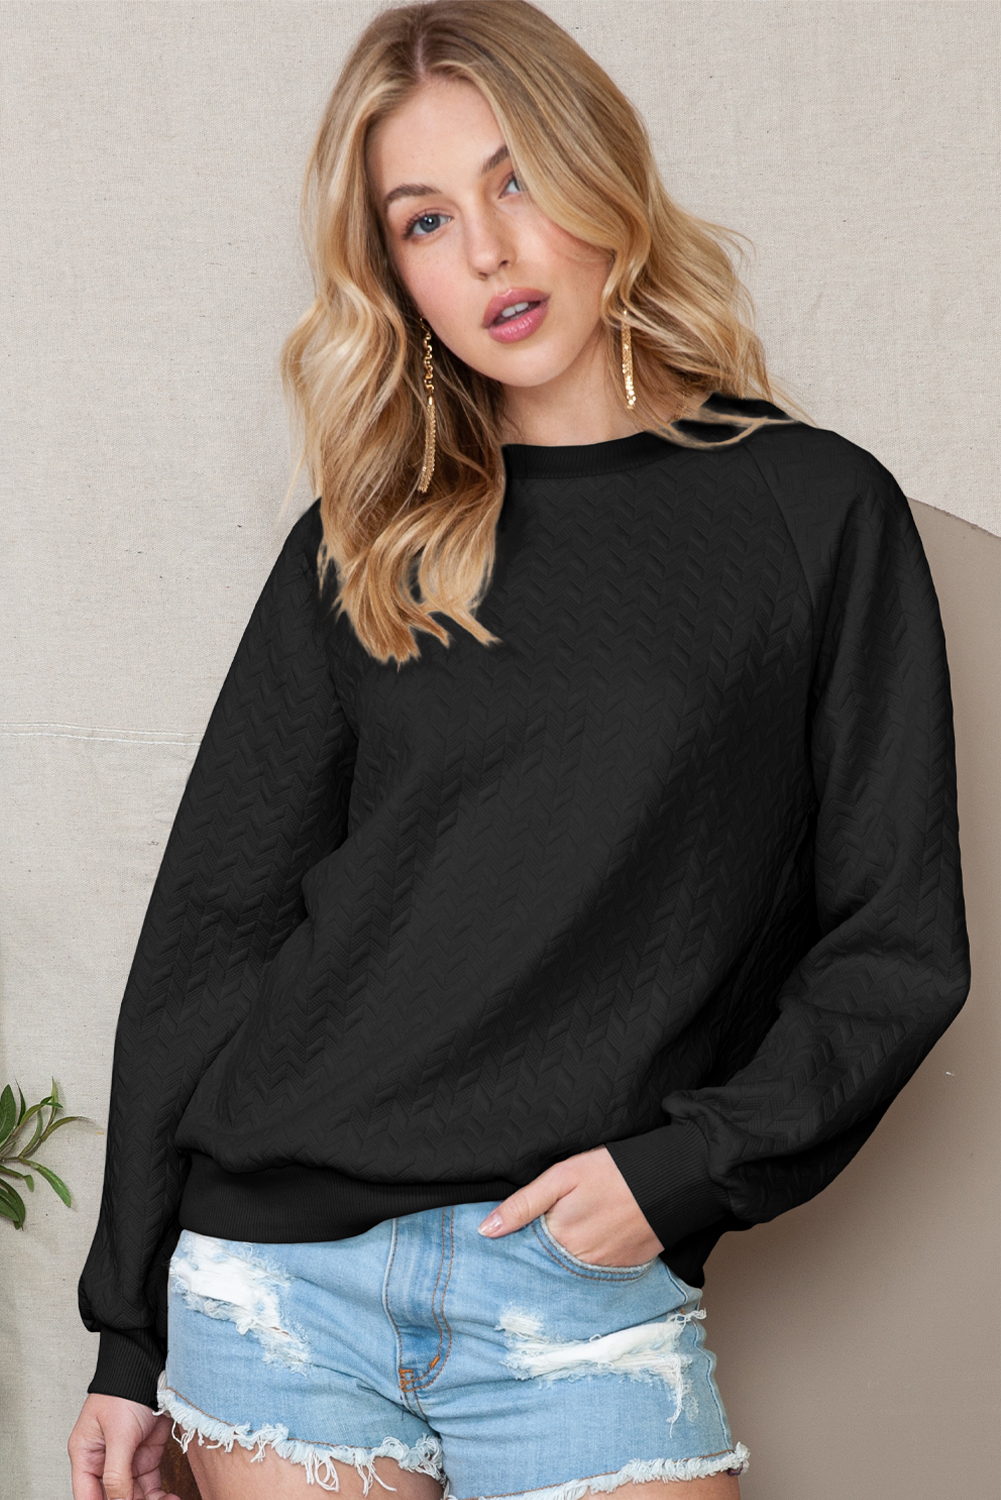 Shewin Wholesale Southern Clothes Black Solid Color Textured Raglan Sleeve Pullover Sweatshirt